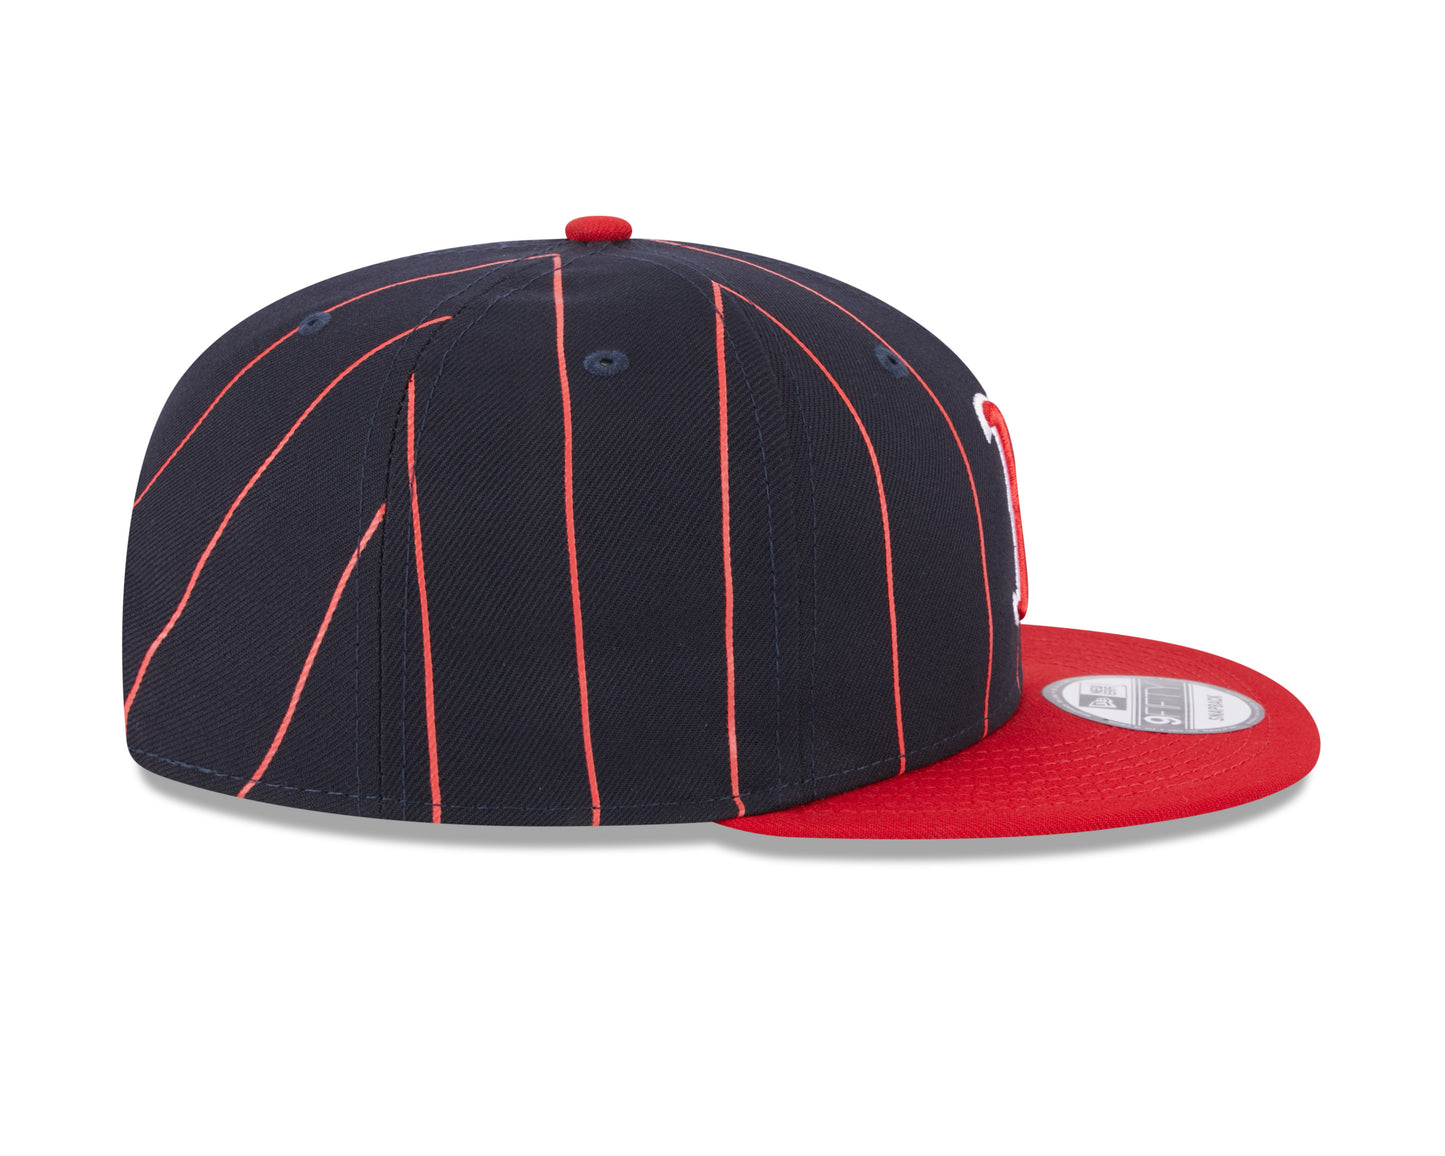 Boston Red Sox Navy/Red Vintage New Era 9FIFTY Snapback Hat